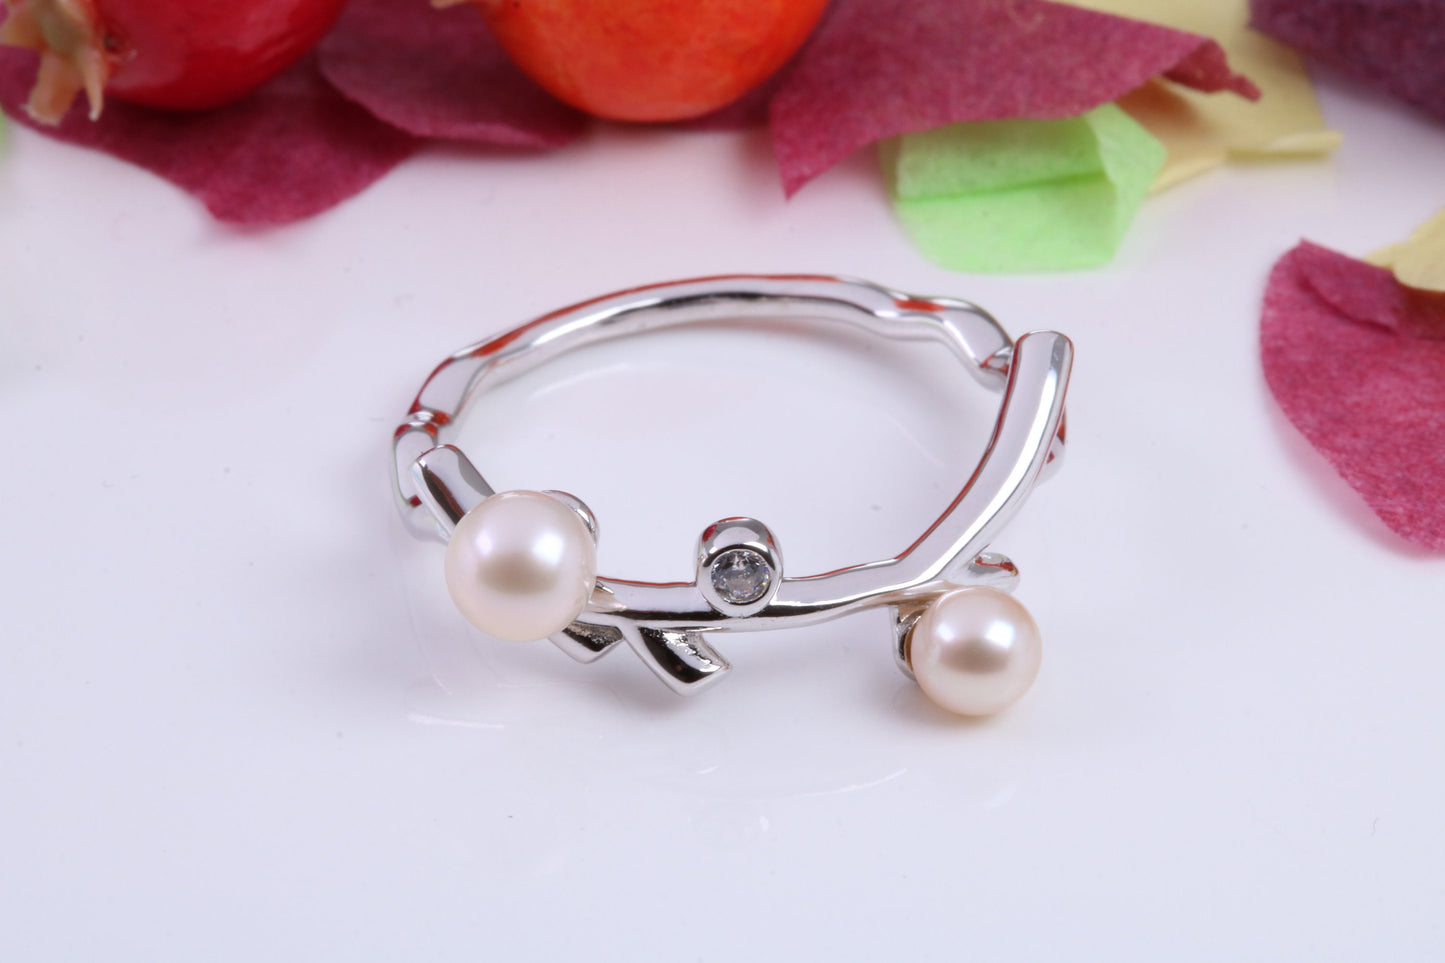 Tree Branch Ring set with Pearls and Cubic Zirconia, Made from solid Silver